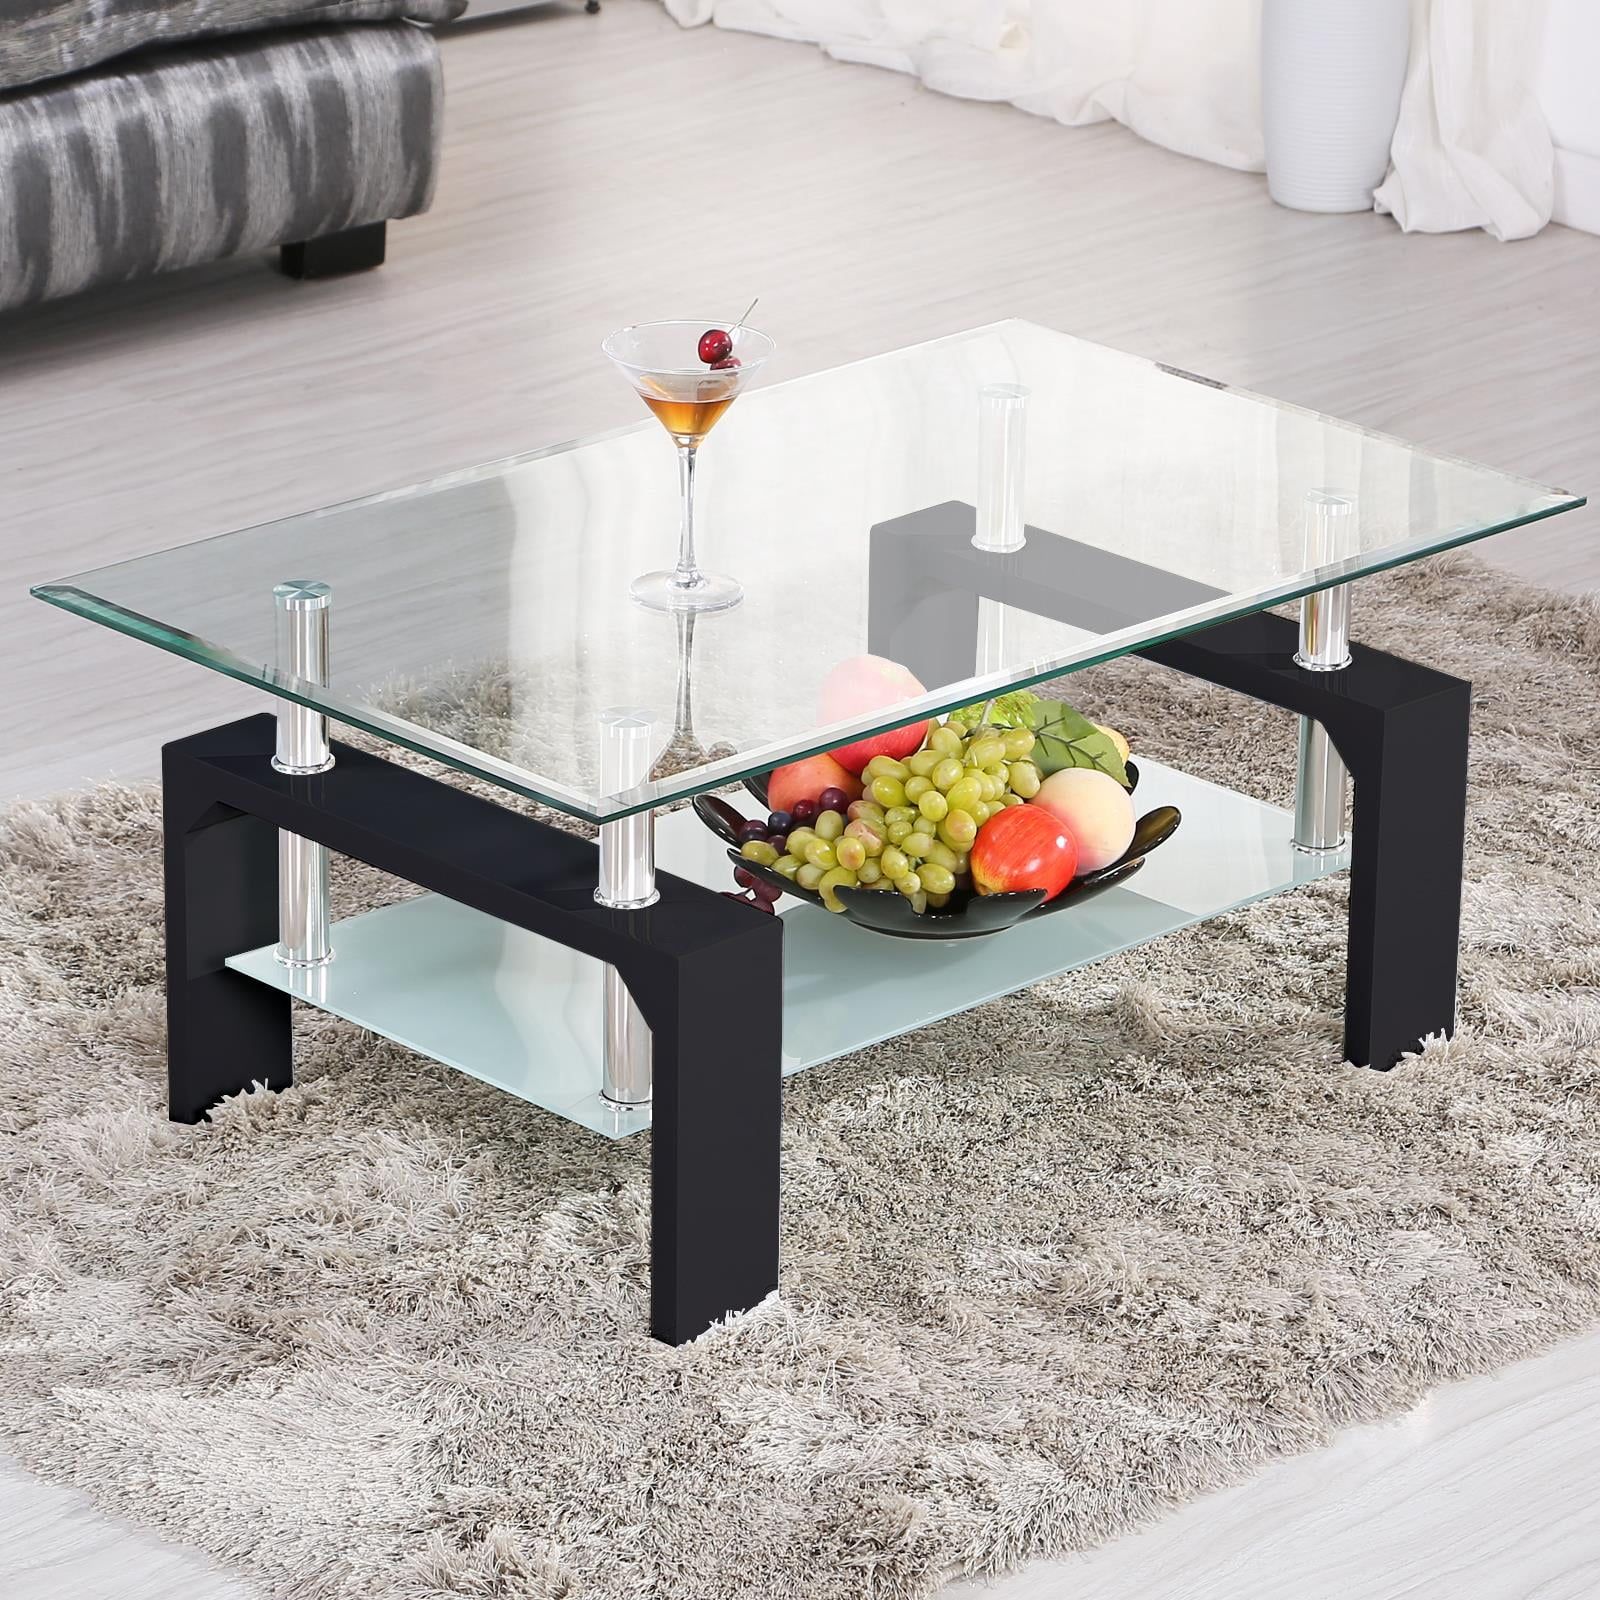 Ktaxon Rectangular Glass Coffee Table Shelf Wood Living Room Furniture Throughout Wood Tempered Glass Top Coffee Tables (Gallery 13 of 20)